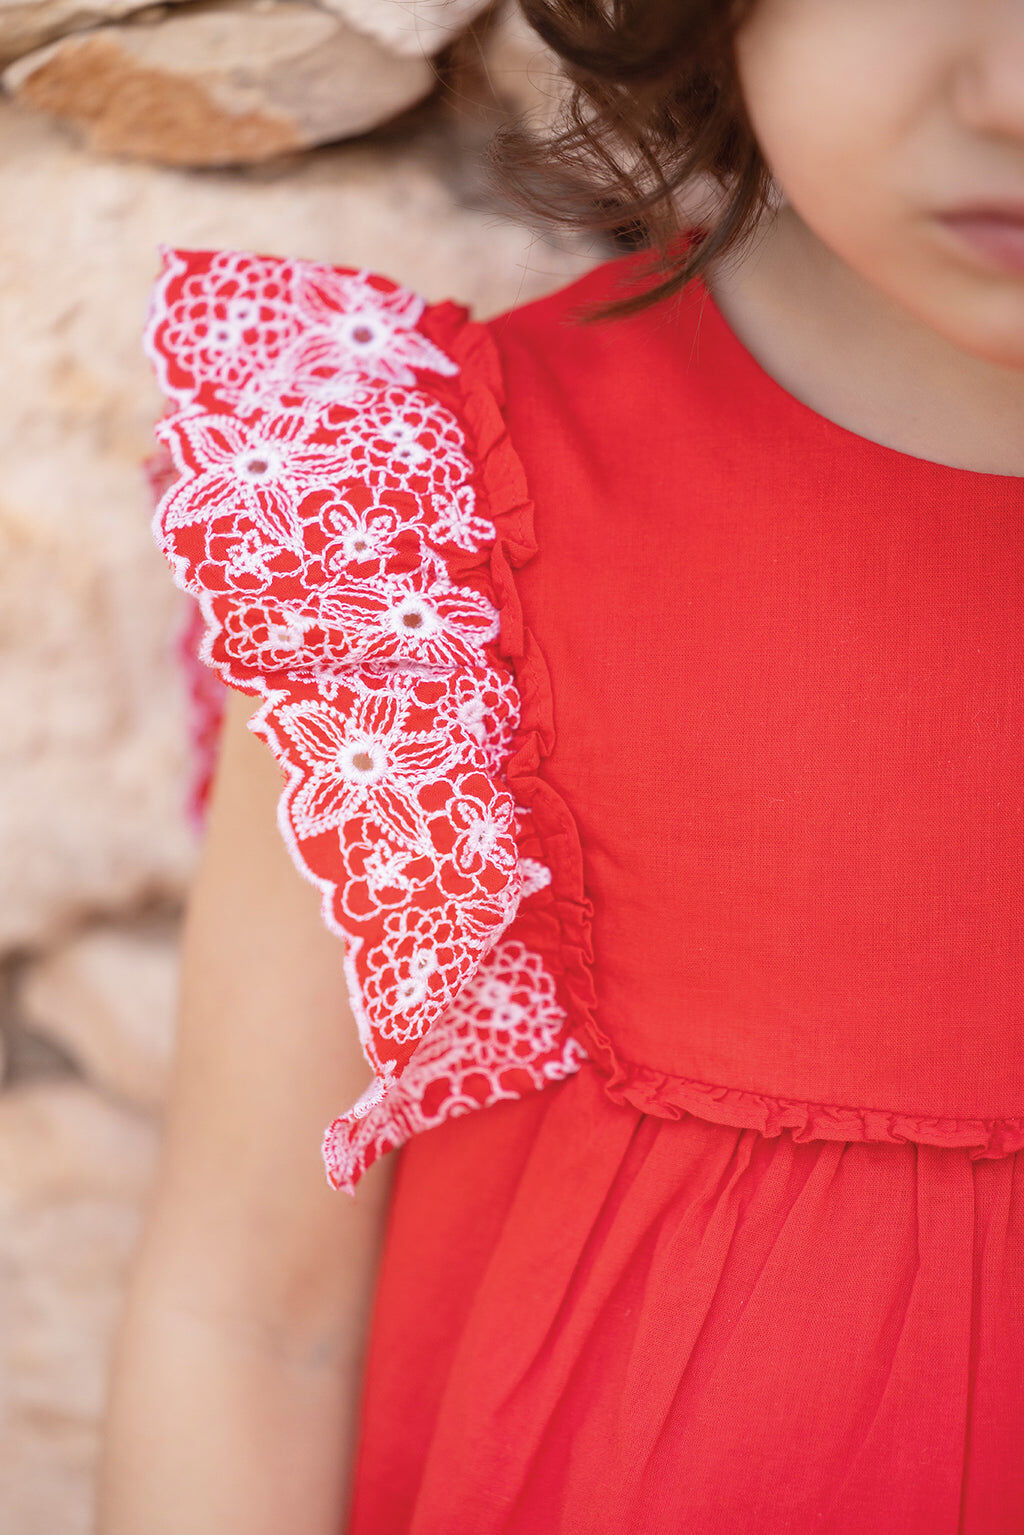 Blouse - Poppy floral embroidery